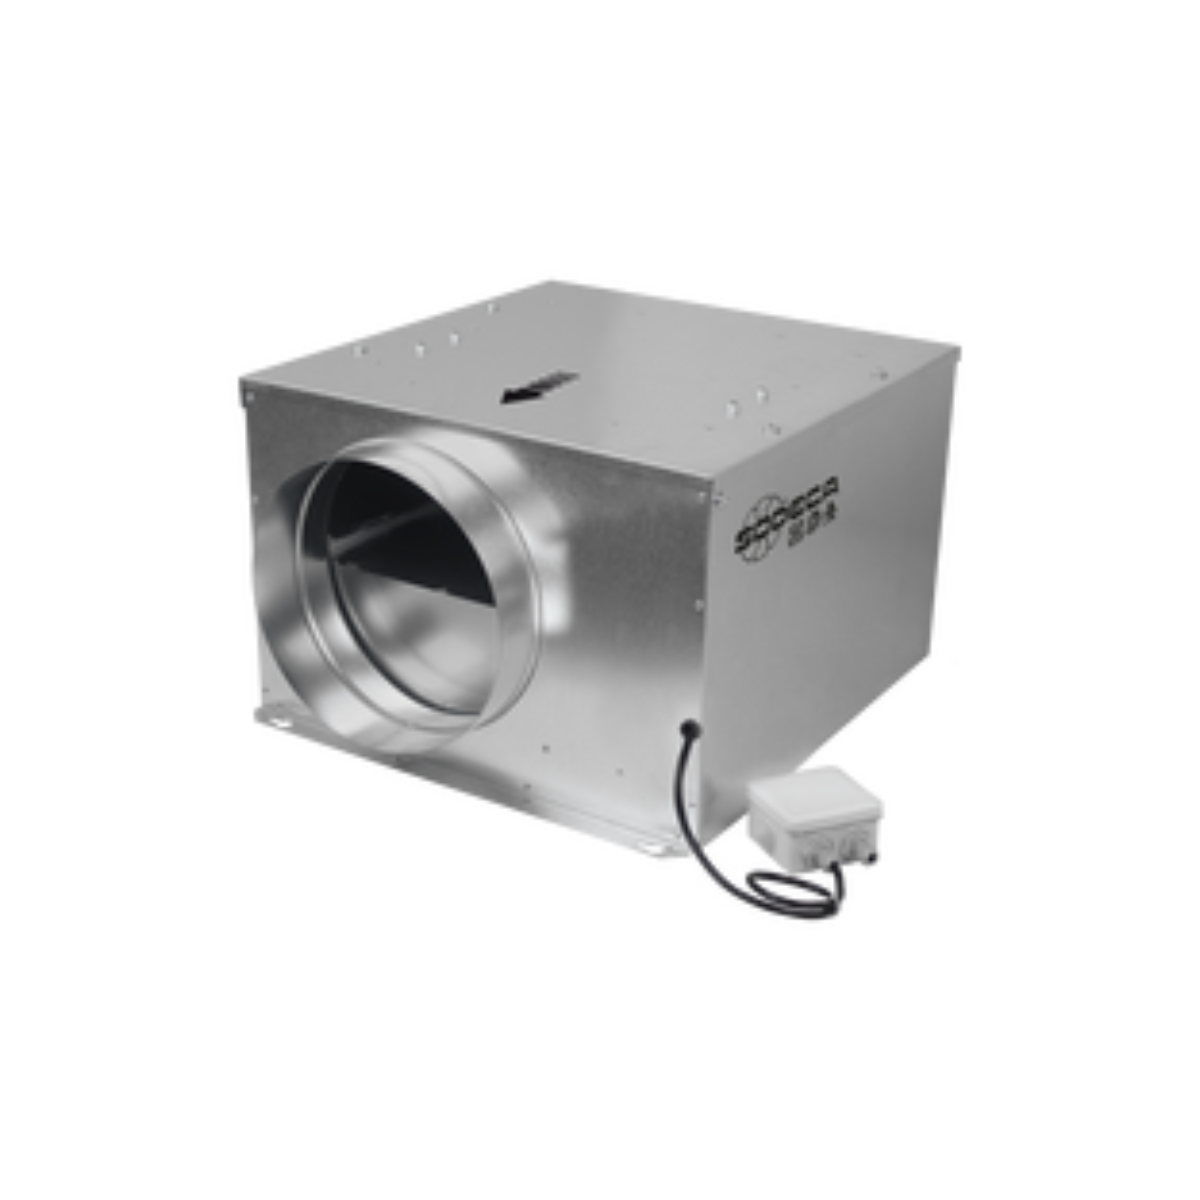 Sodeca In-line Duct Extractor Fans with Acoustic Casing - SVE